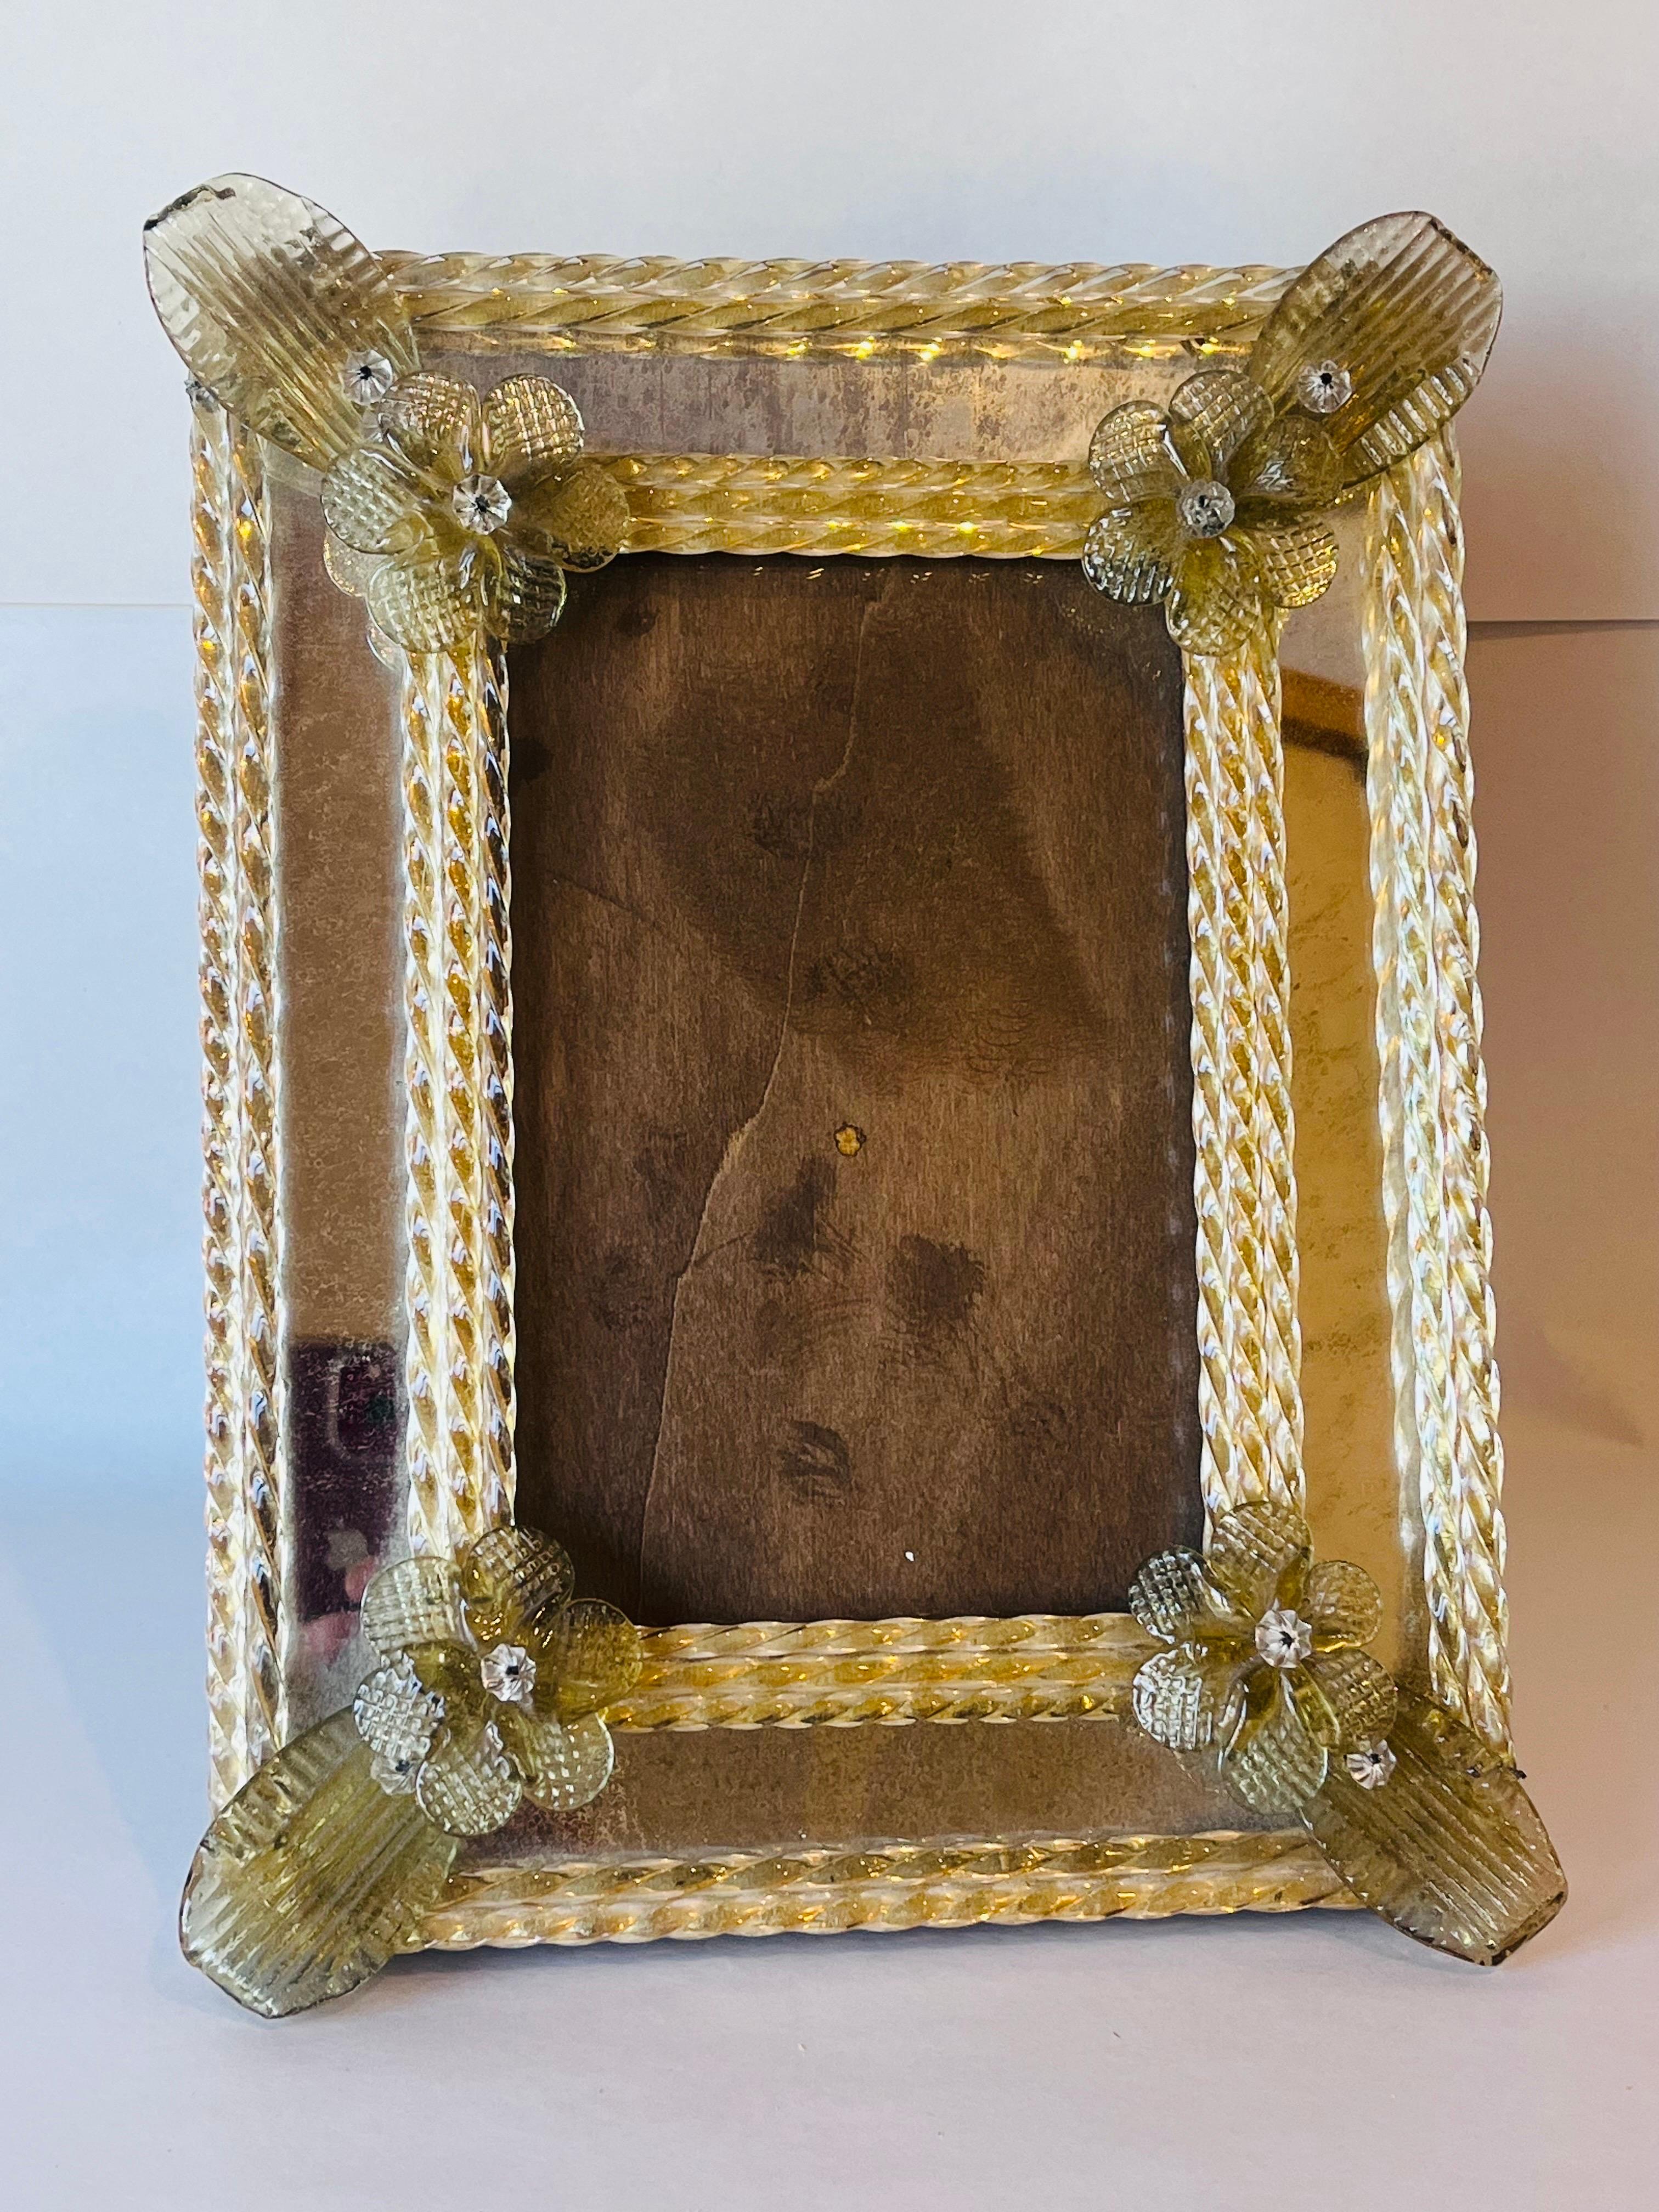 Ornate Venetian Murano Glass Picture or Photograph Frame Desk or Table Accessory 10